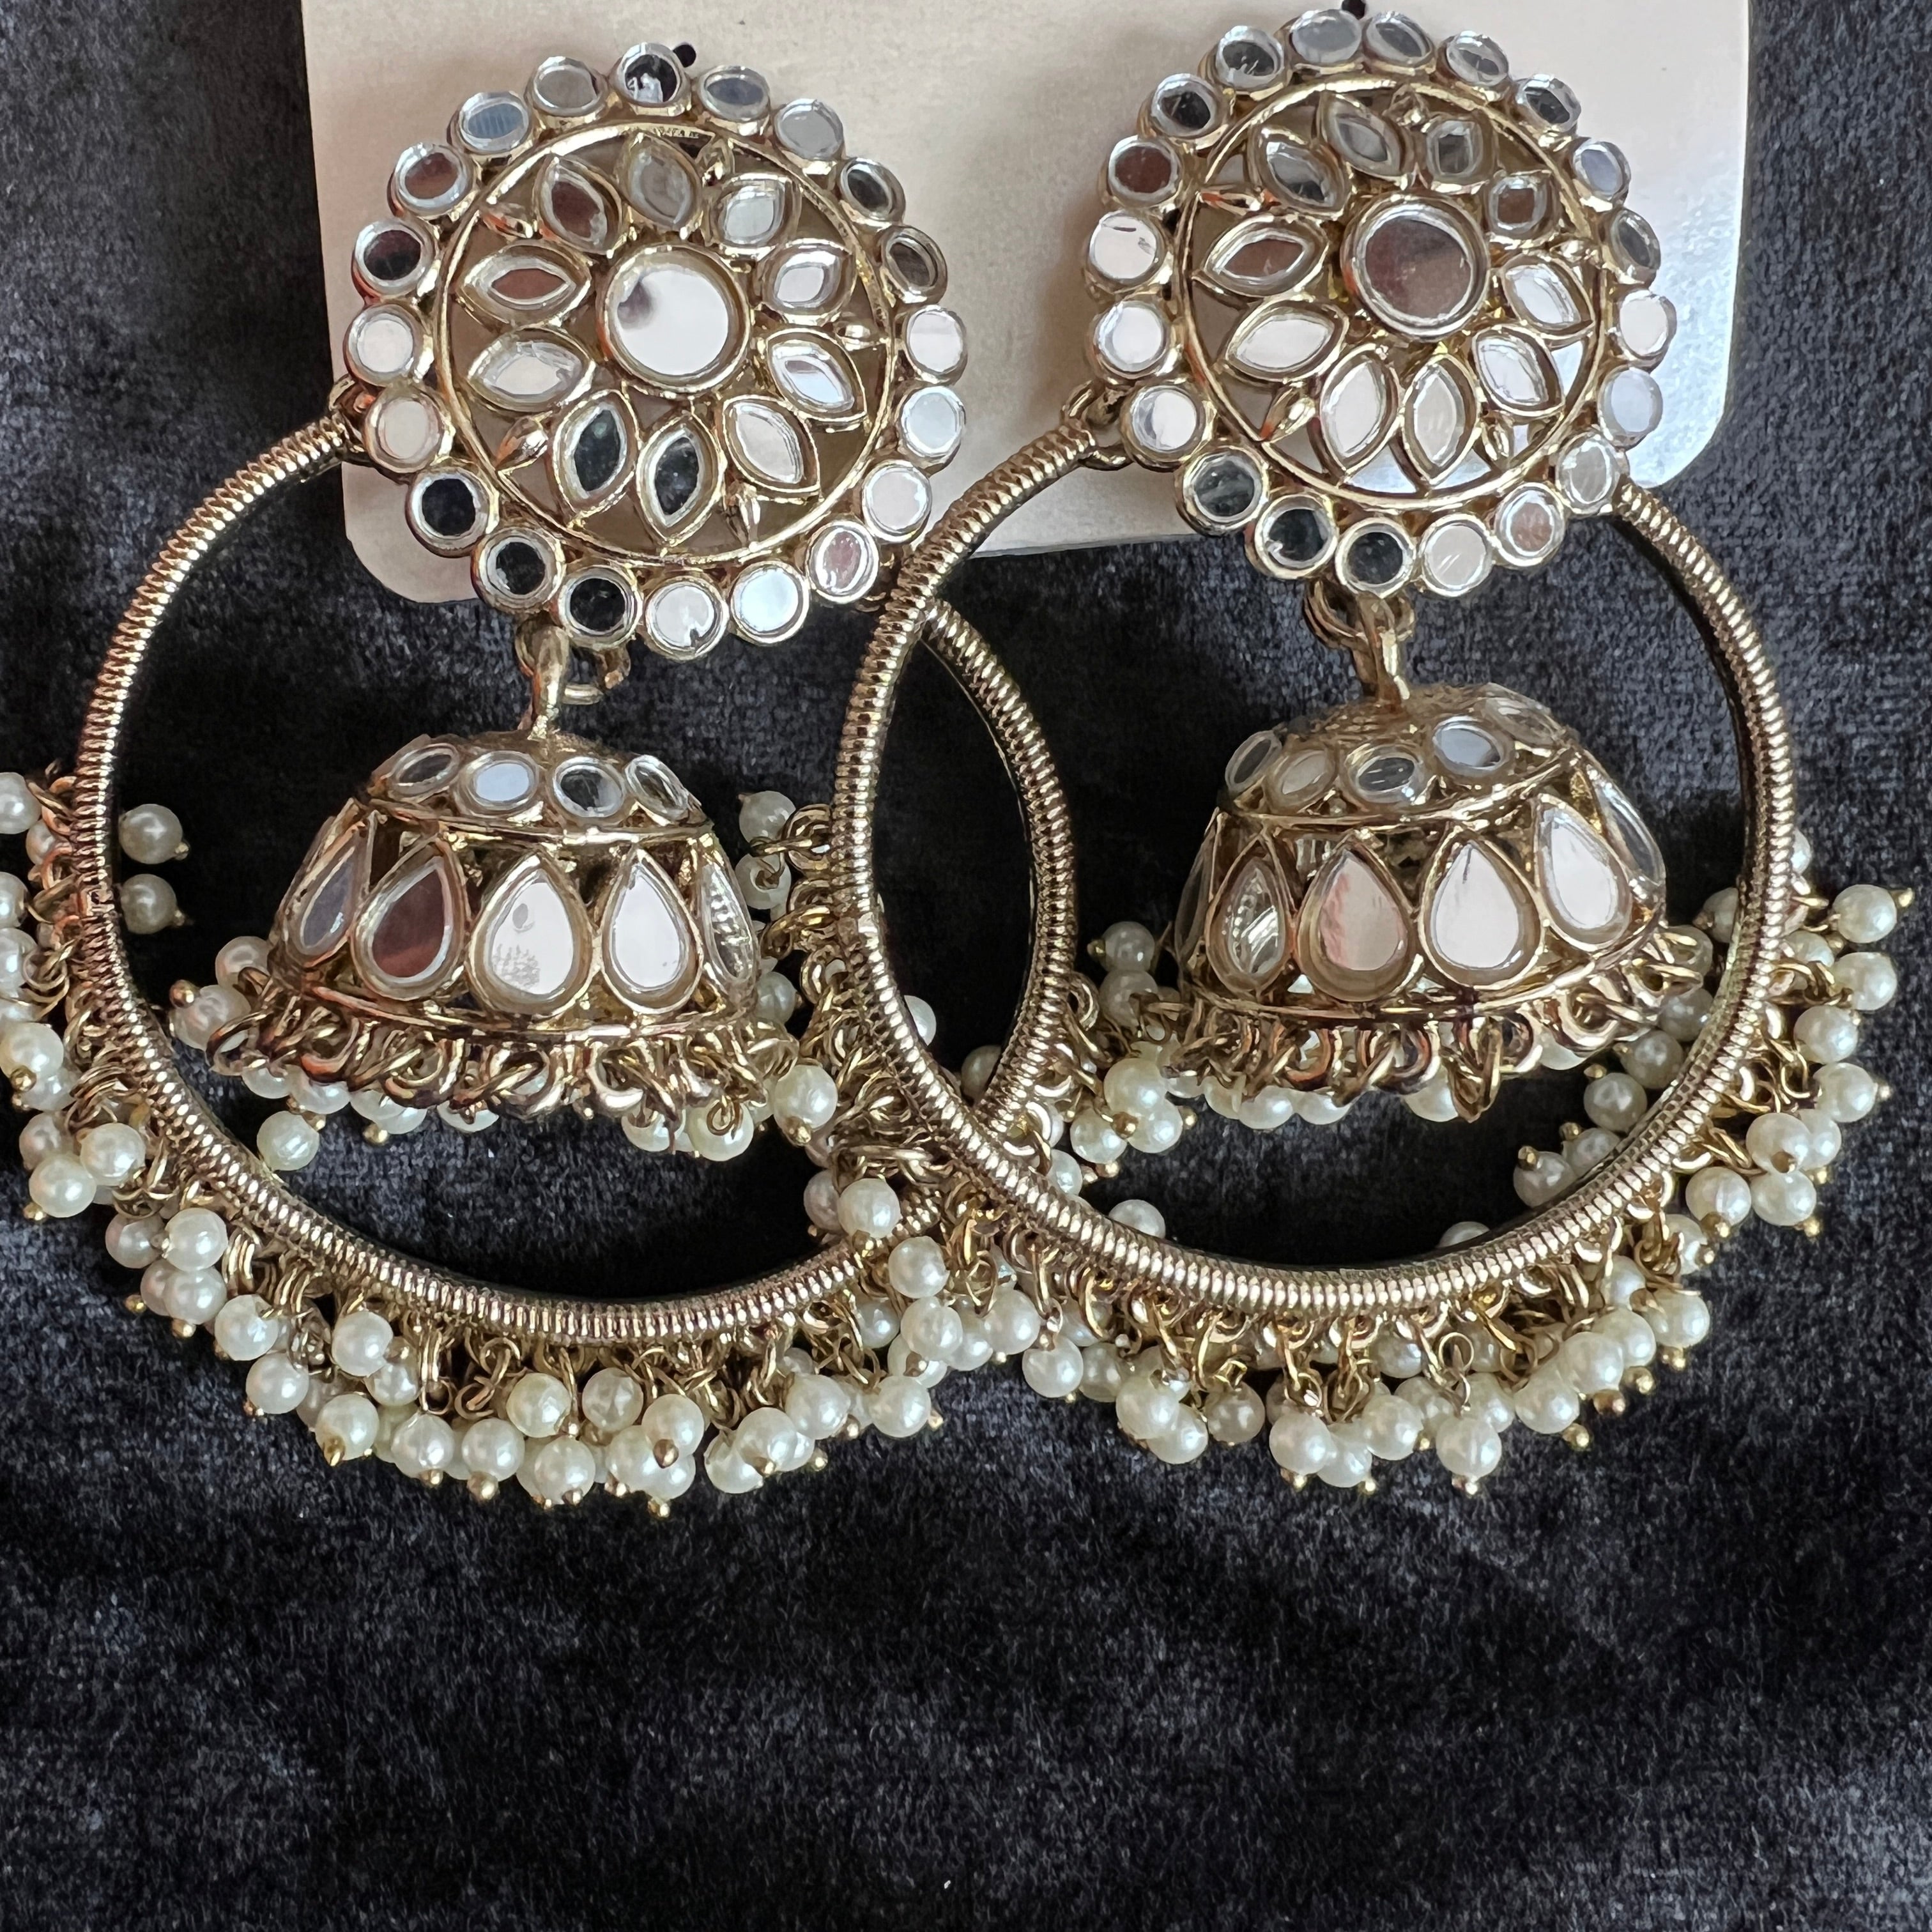 Large Mirrored Earrings - Vintage India NYC